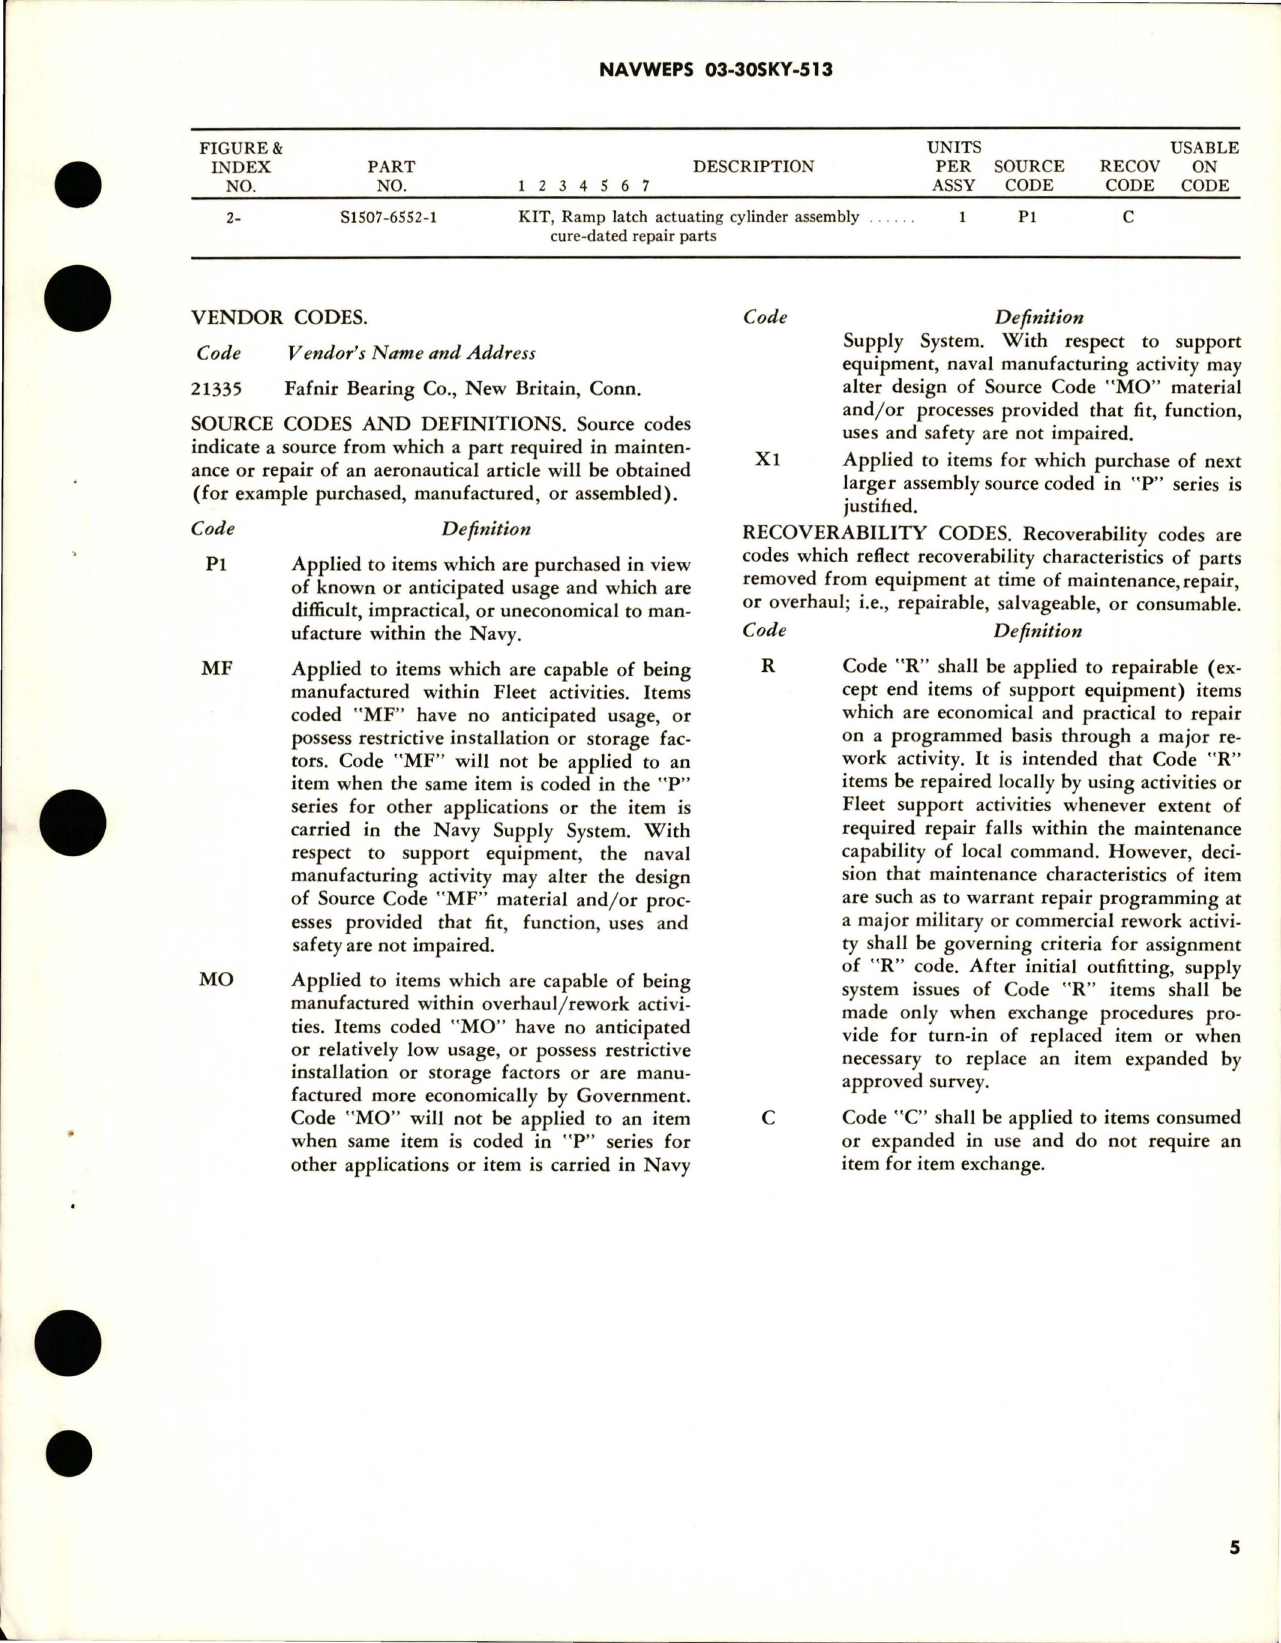 Sample page 5 from AirCorps Library document: Overhaul Instructions with Parts Breakdown for Ramp Latch Actuating Cylinder Assembly - Parts S1565-61351, S1565-61351-1, and S1565-61351-2